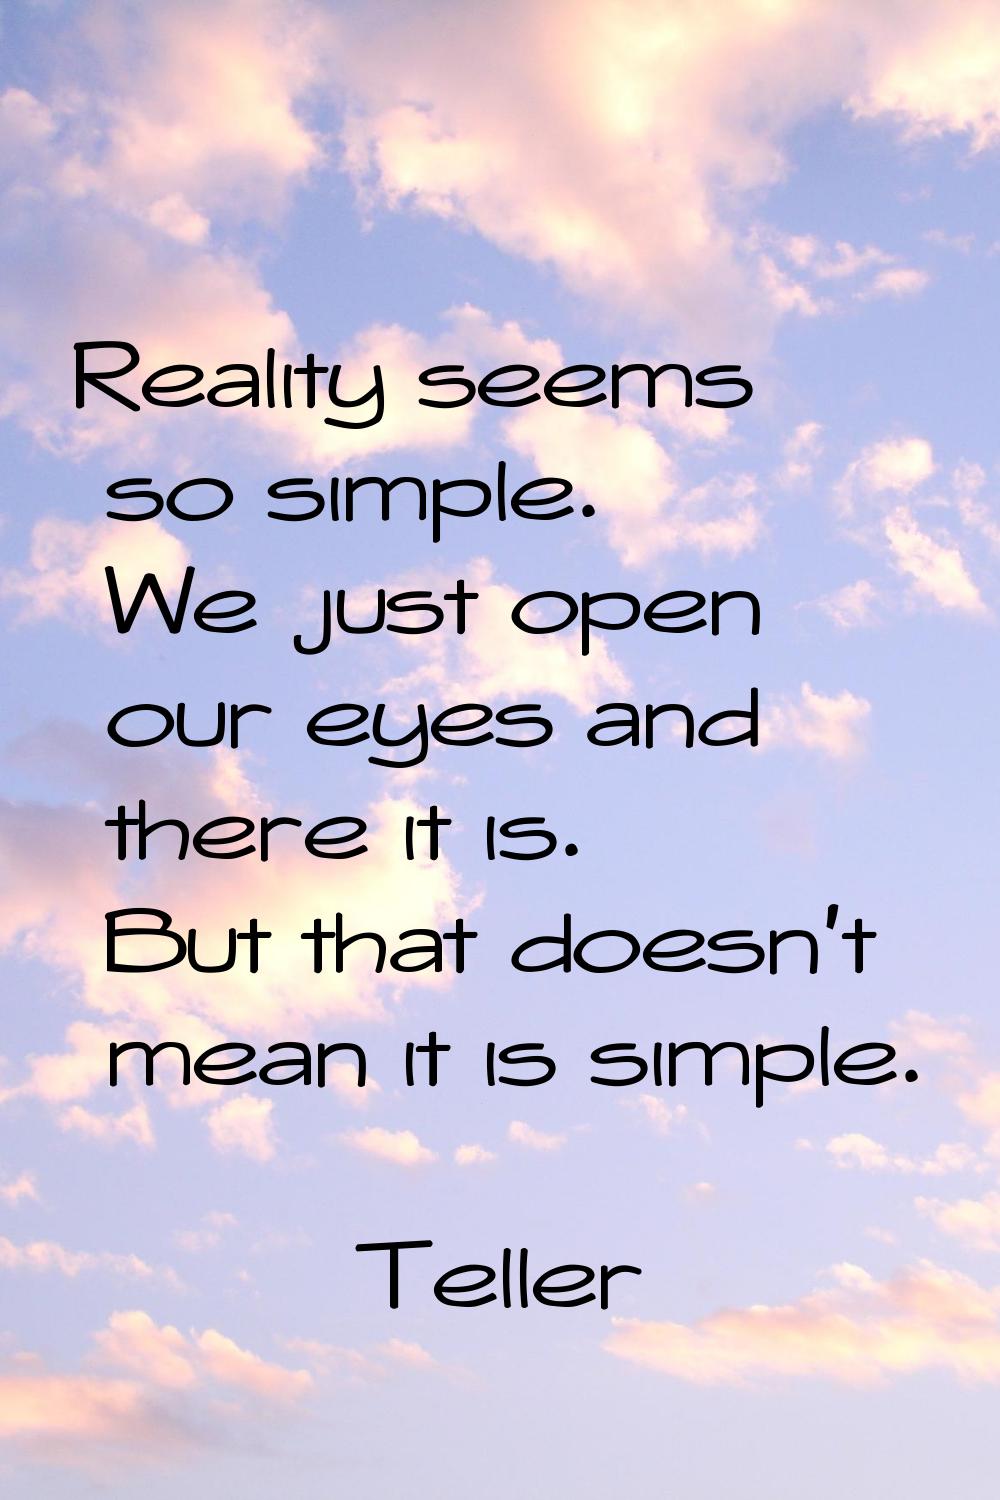 Reality seems so simple. We just open our eyes and there it is. But that doesn't mean it is simple.